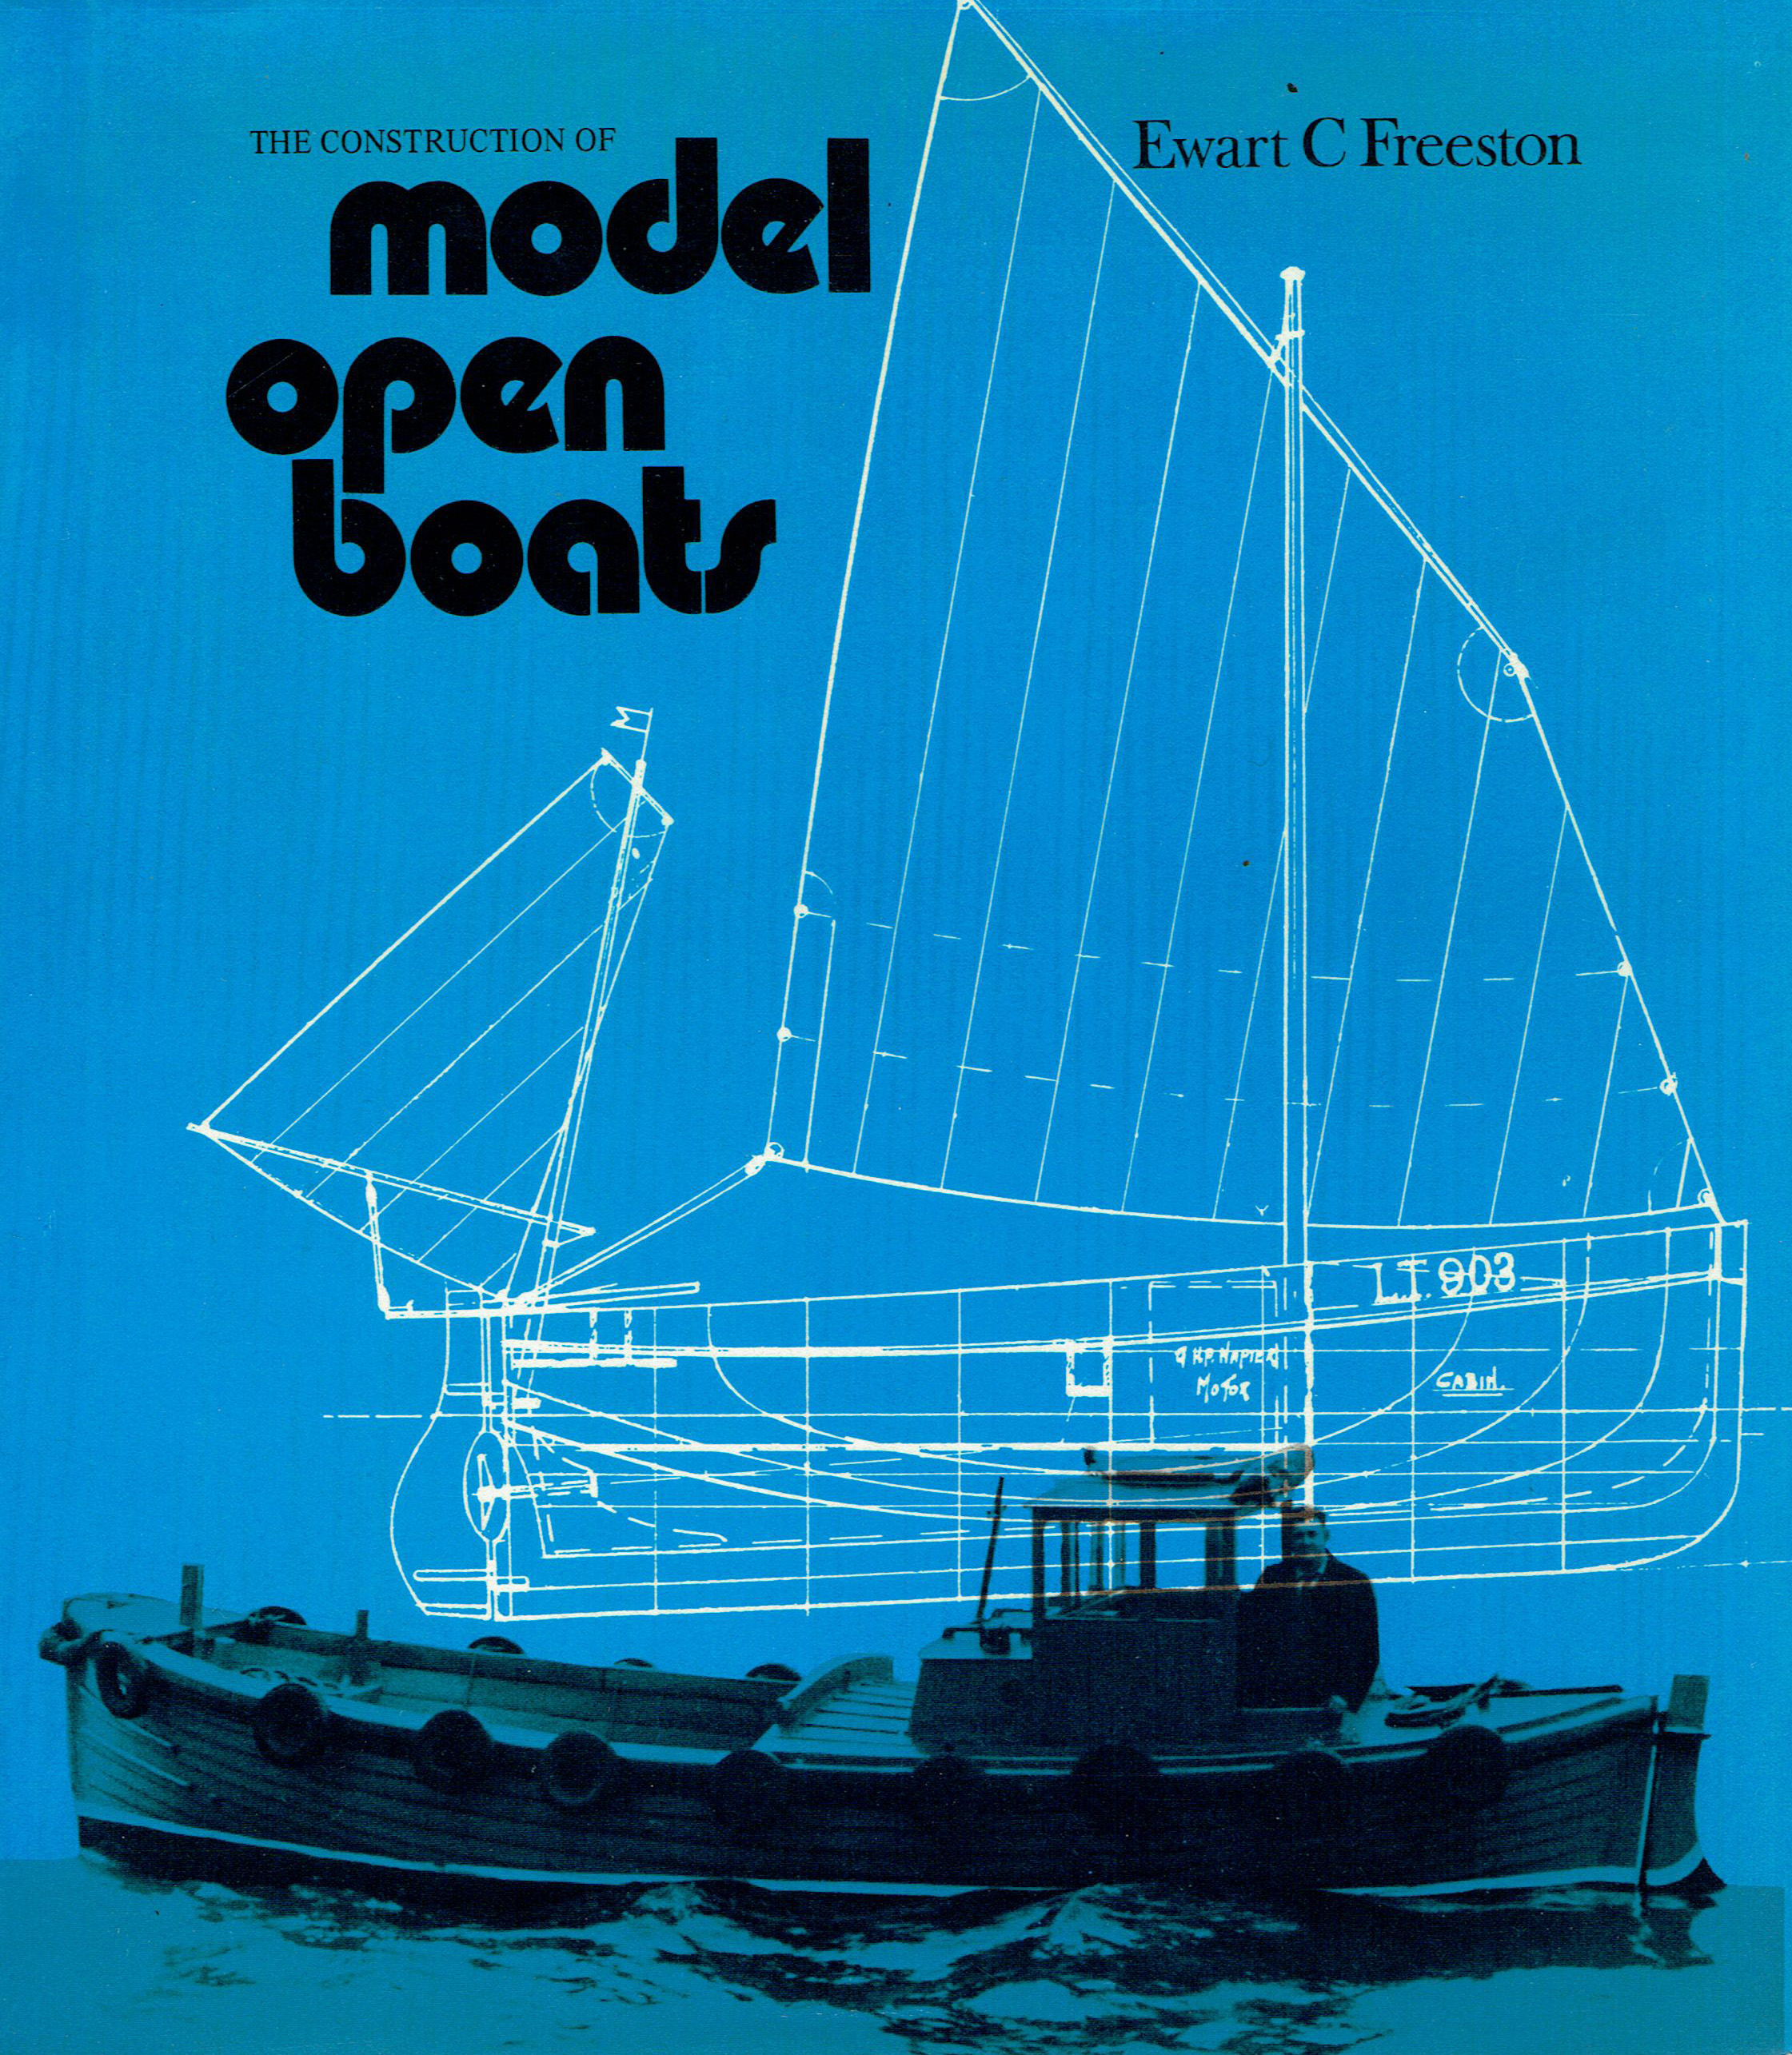 The construction of model open boats